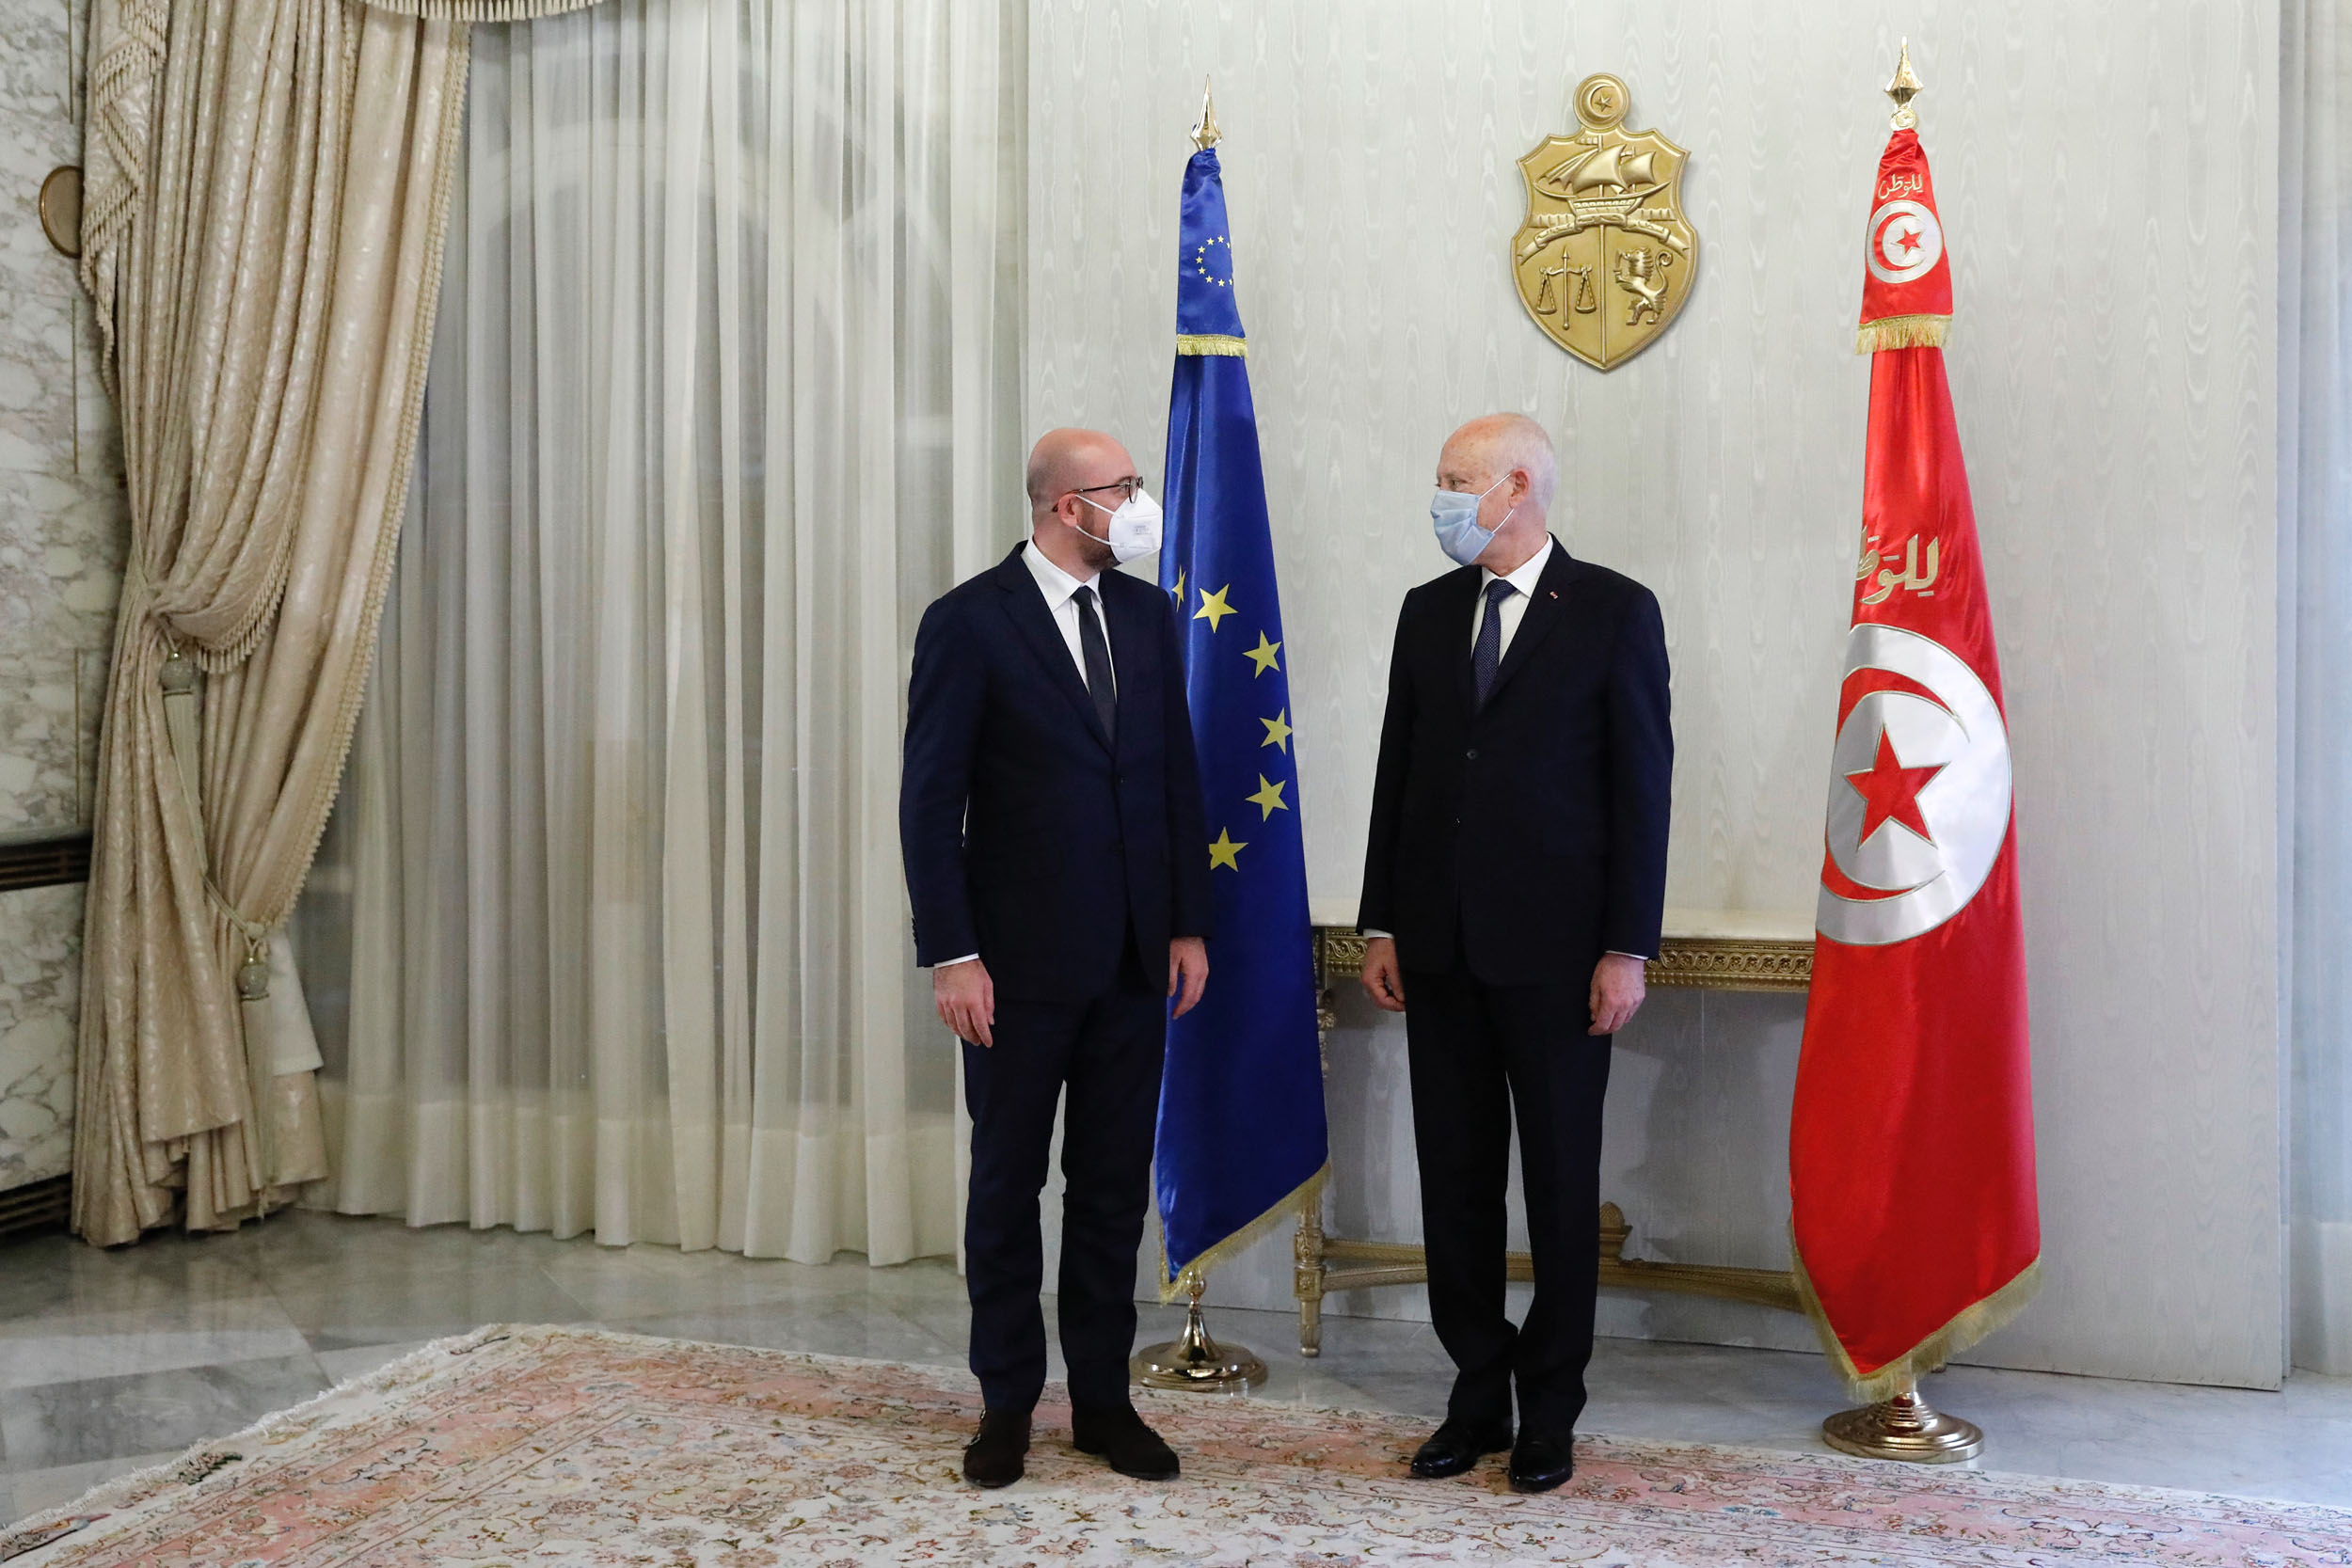 This handout picture released by the European Council (EC) on April 5, 2021 shows President of the European Council Charles Michel (L) meeting with Tunisia's President Kais Saied (R) at Carthage Palace east of the capital Tunis. (Photo by DARIO PIGNATELLI / EBS / AFP) / XGTY / RESTRICTED TO EDITORIAL USE - MANDATORY CREDIT "AFP PHOTO / EUROPEAN COUNCIL/ DARIO PIGNATELLI" - NO MARKETING - NO ADVERTISING CAMPAIGNS - DISTRIBUTED AS A SERVICE TO CLIENTS